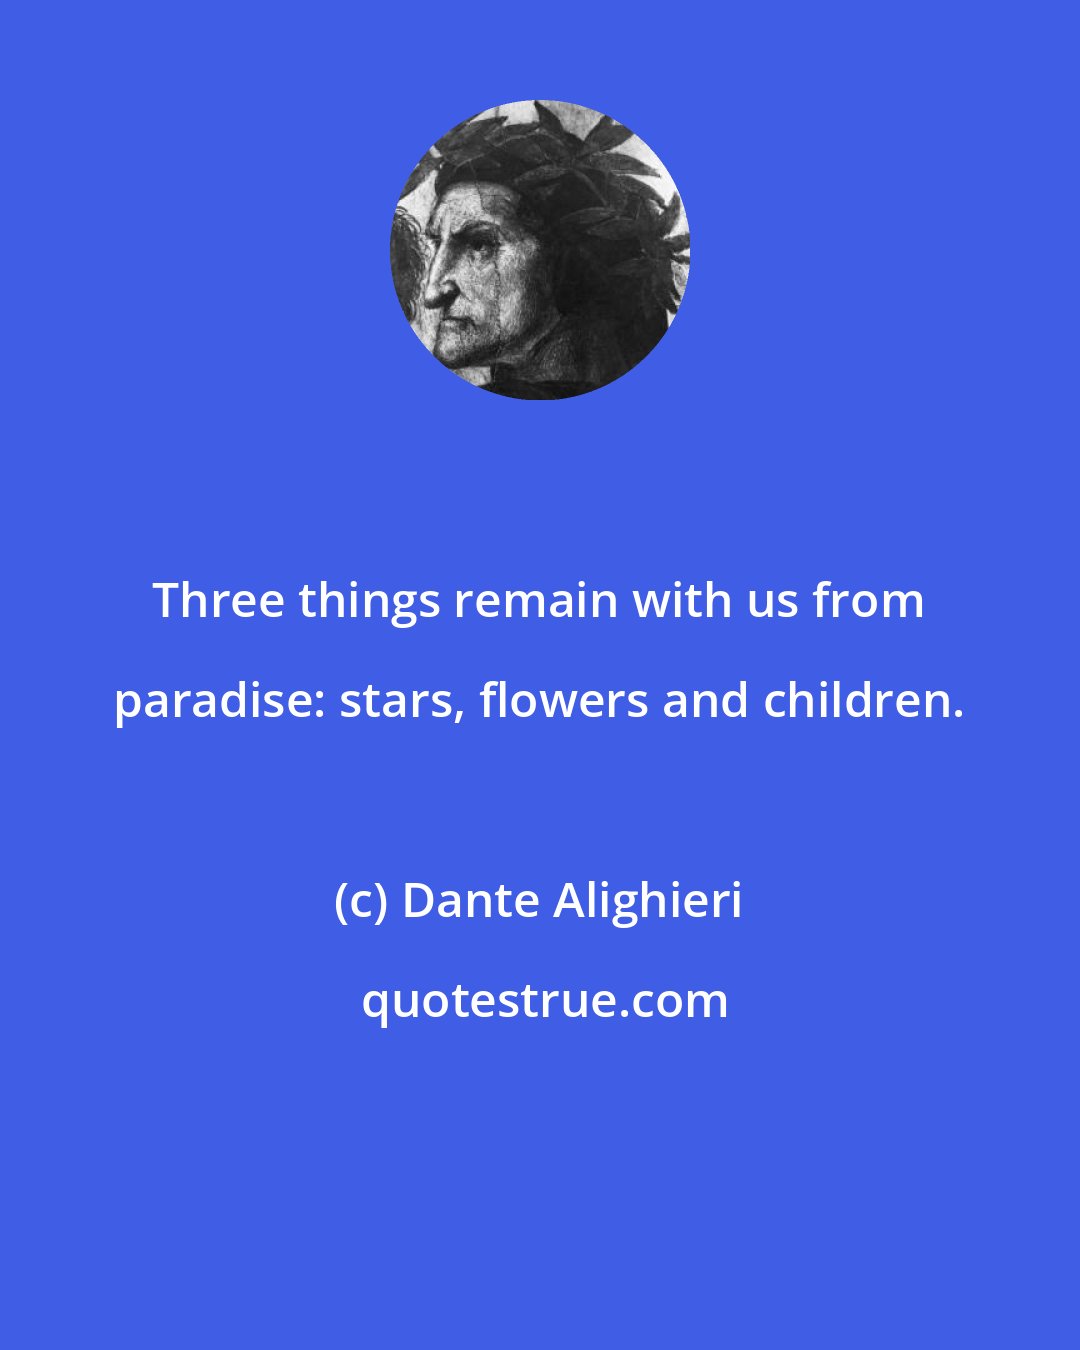 Dante Alighieri: Three things remain with us from paradise: stars, flowers and children.